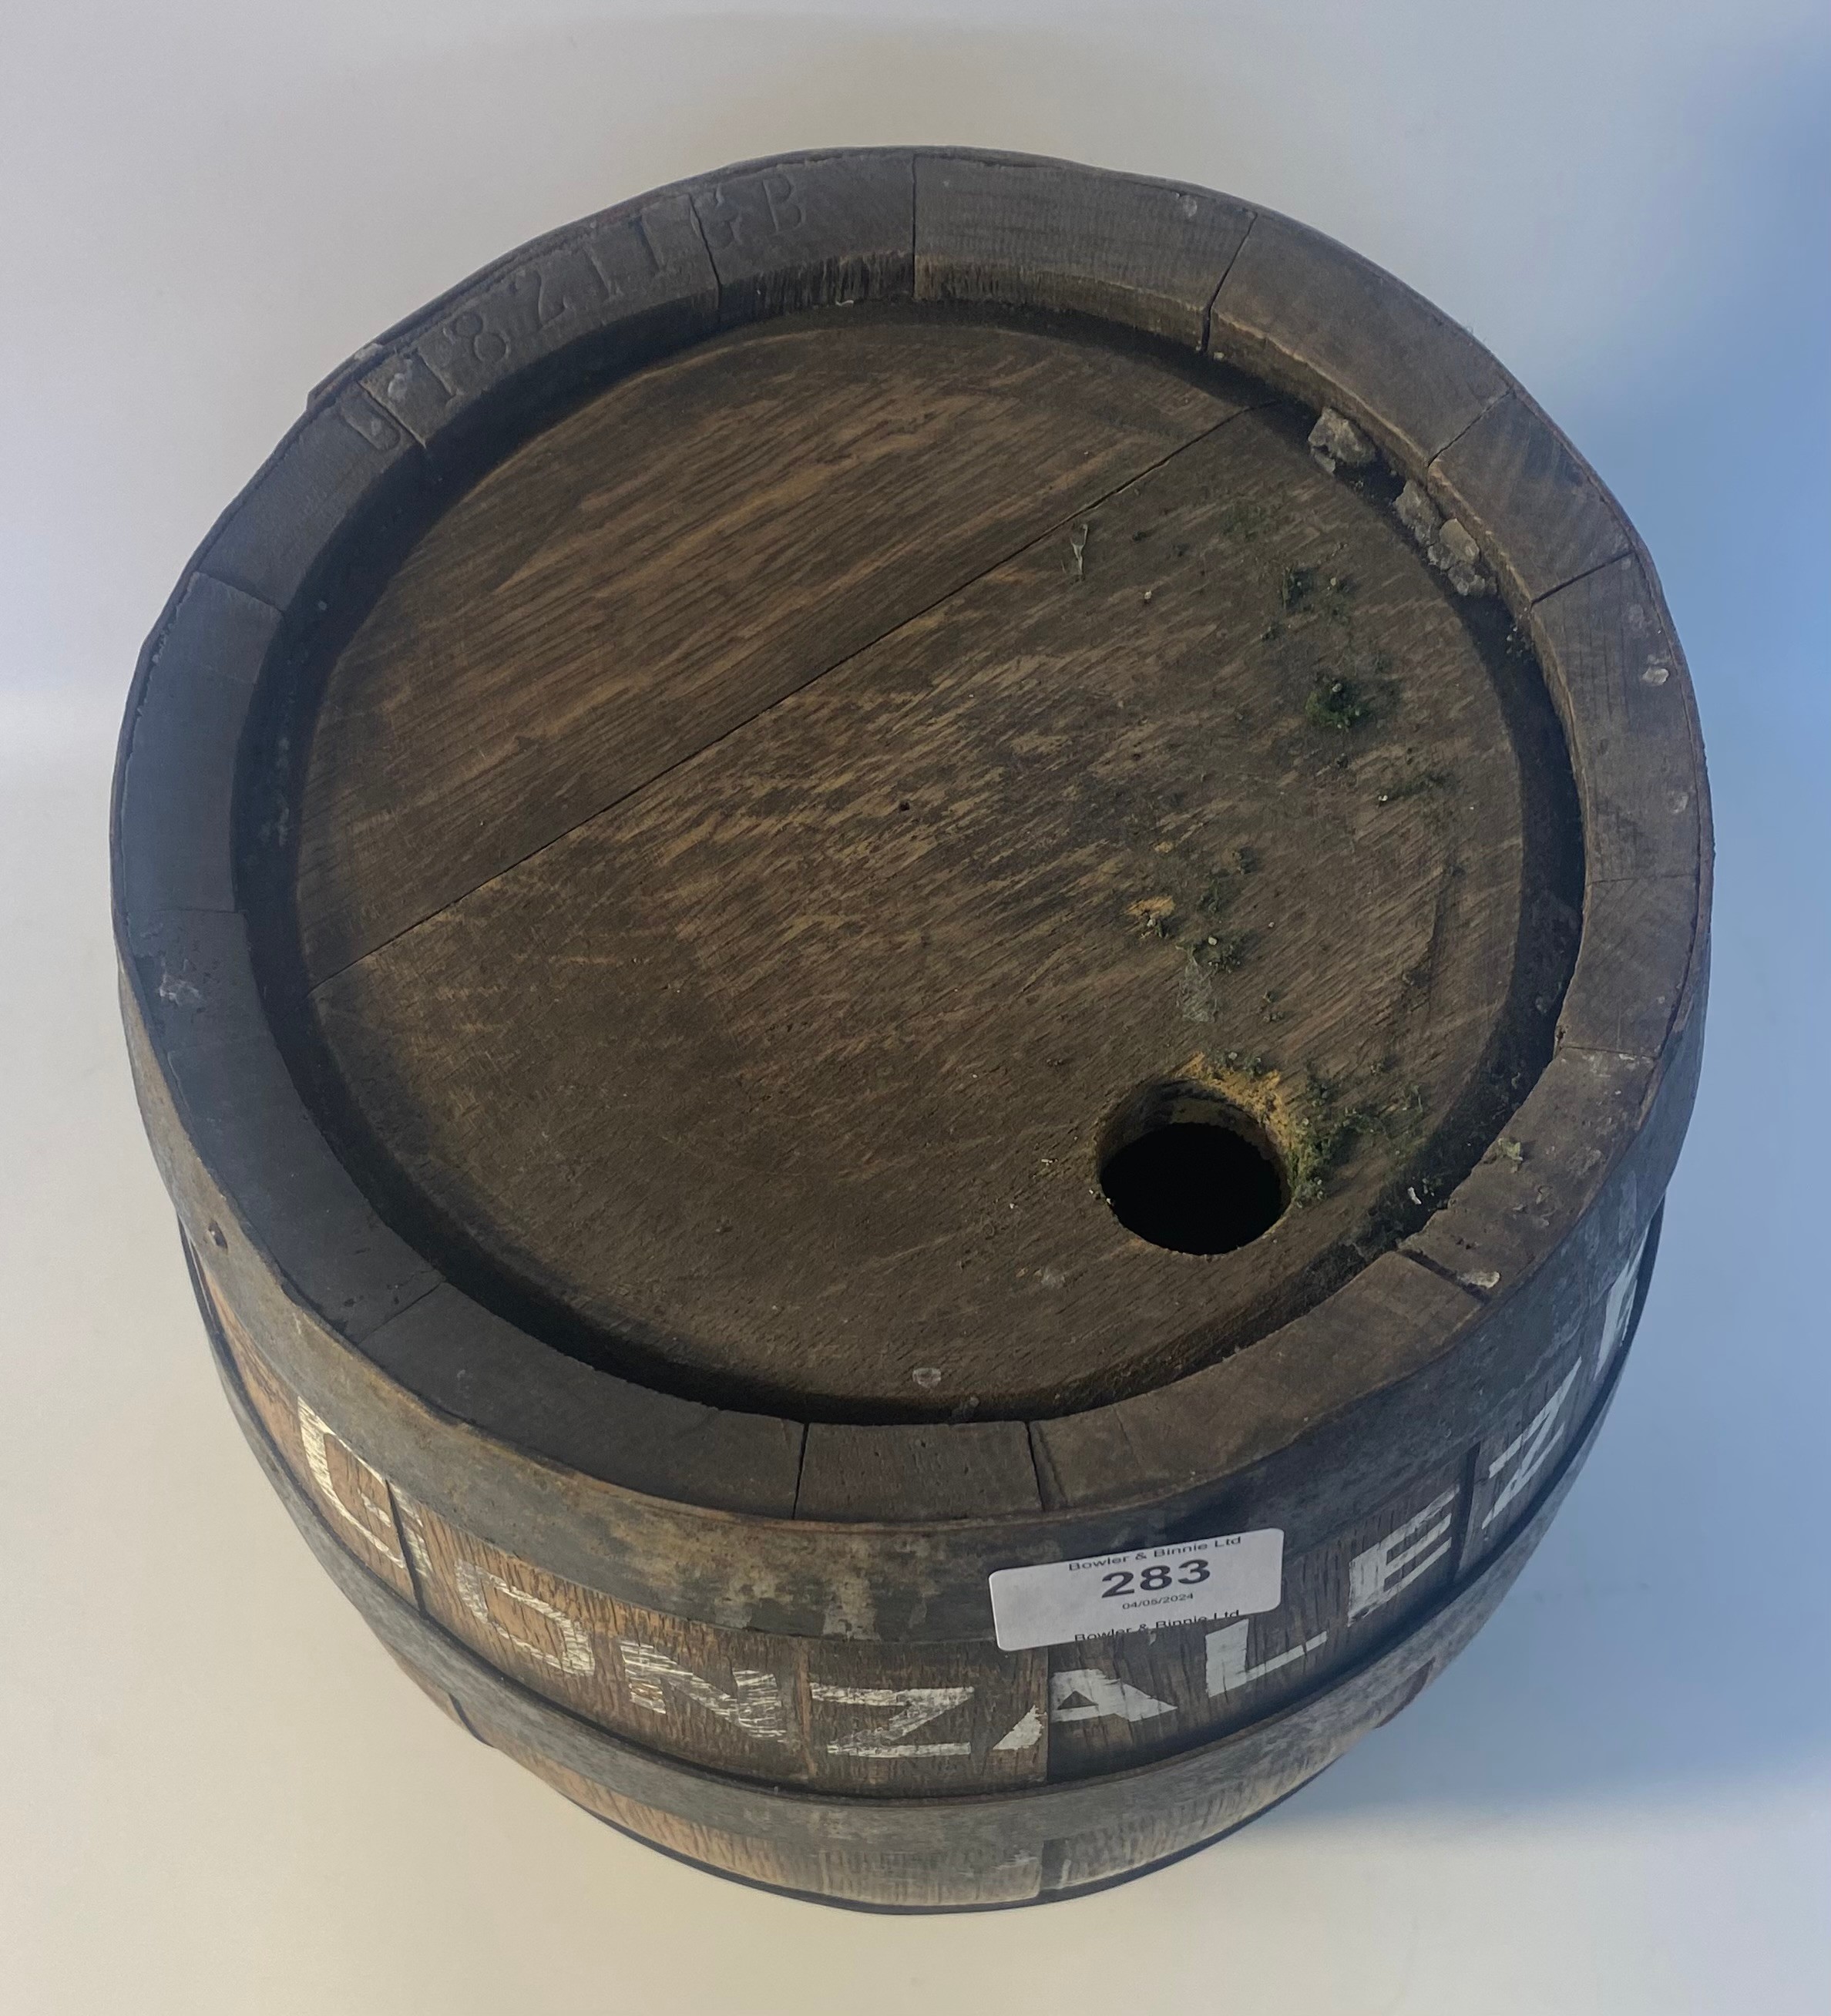 Antique wood & metal bounded sherry barrel [35.5x26cm] - Image 4 of 4